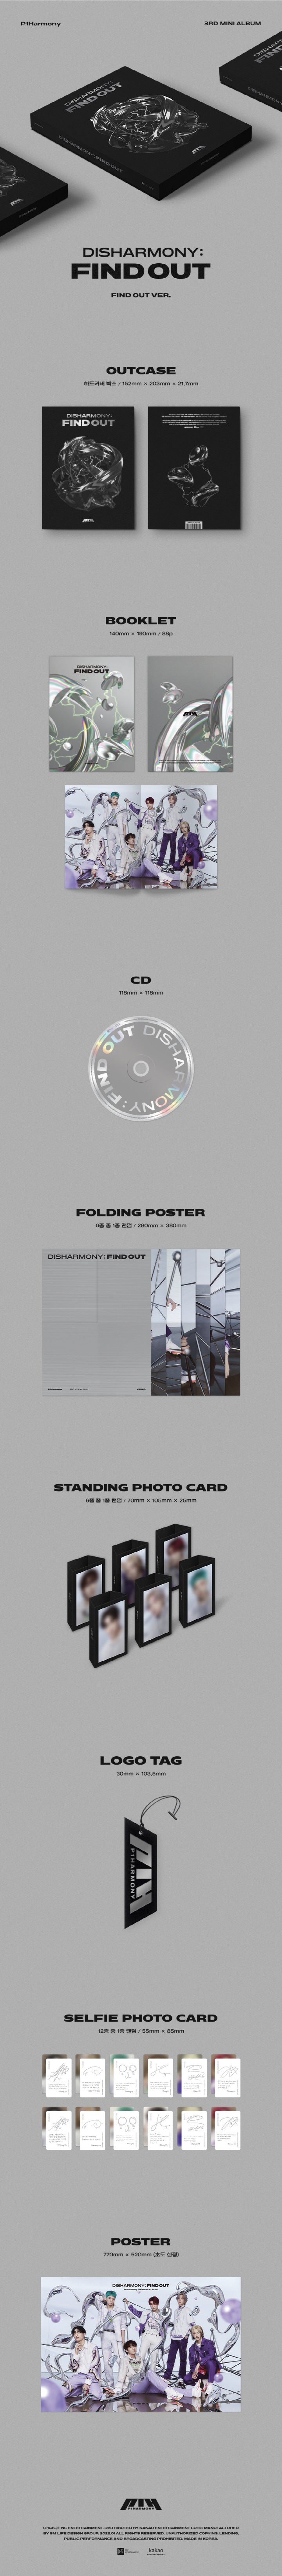 1 CD
1 Booklet
1 Folding Poster (random out of 6 types)
1 Lenticular Photo Card (random out of 6 types) or 1 Standing Phot...